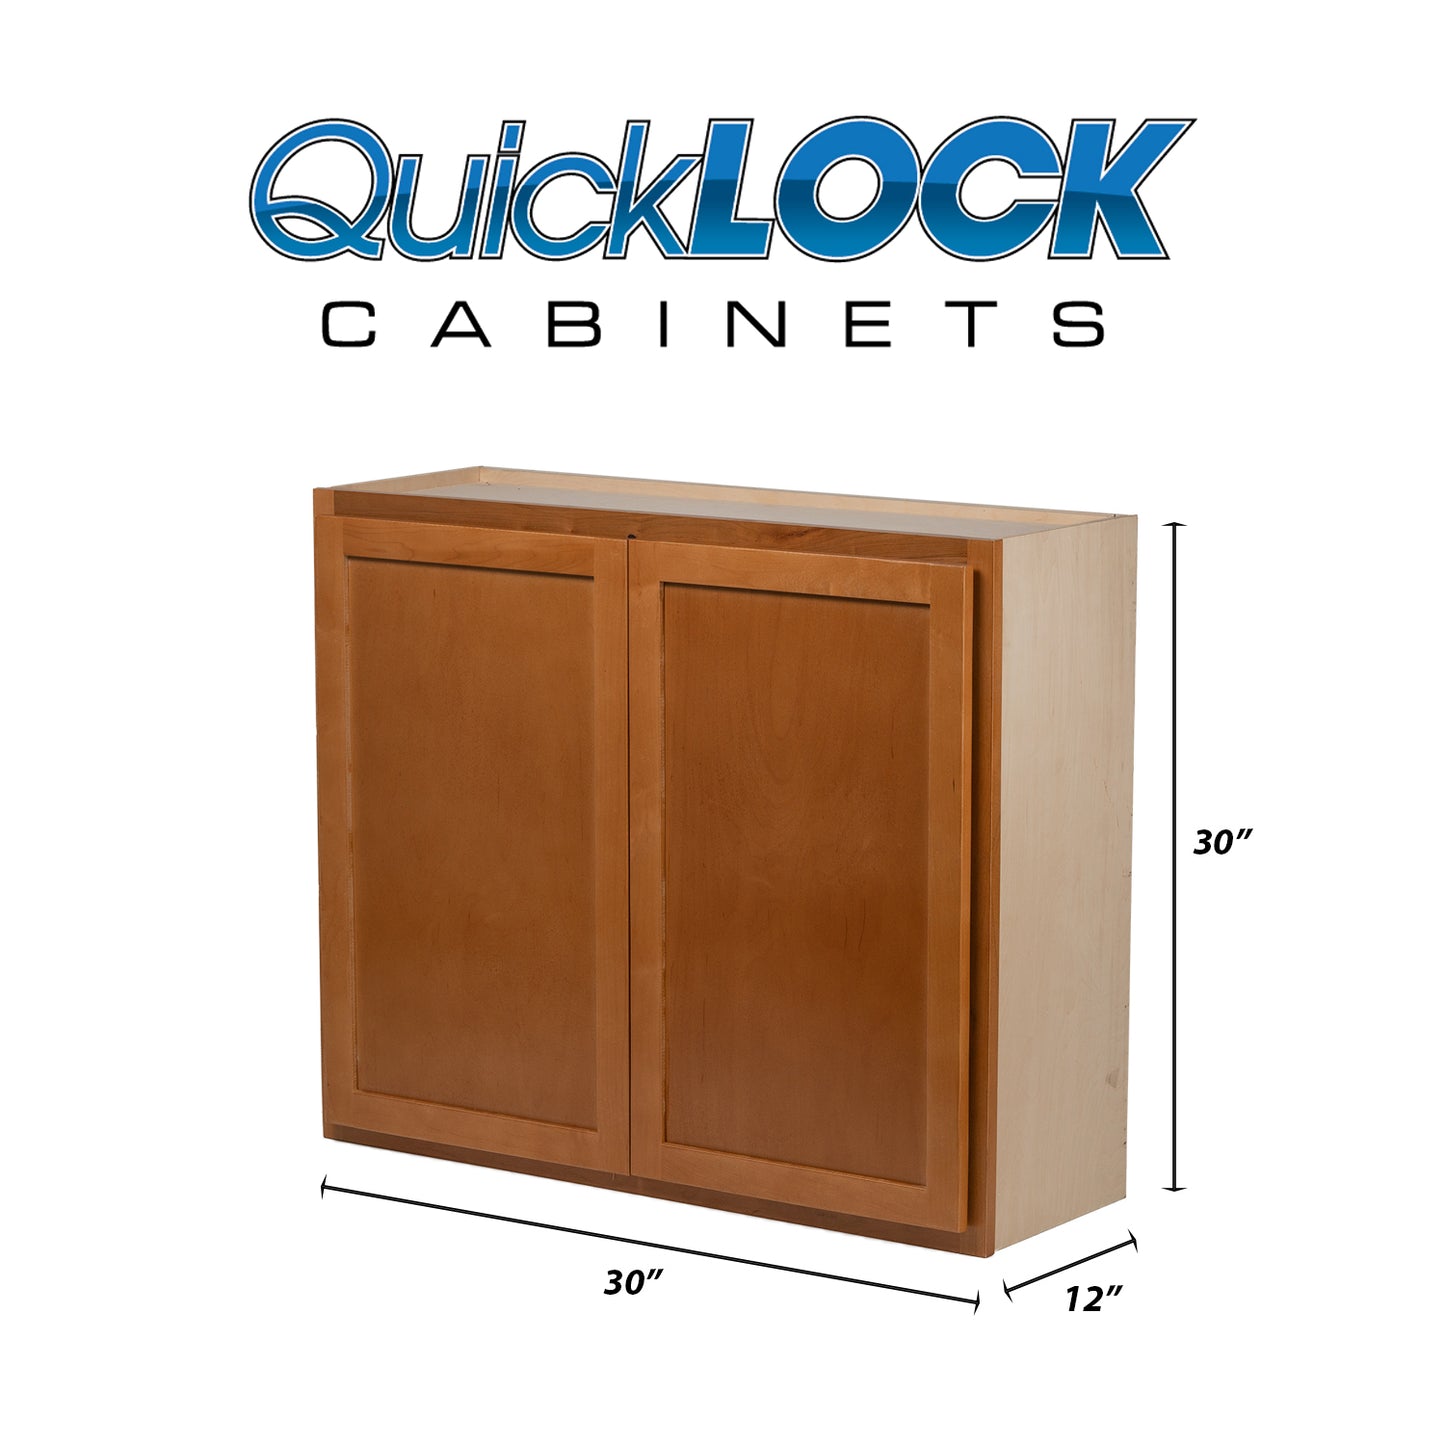 Quicklock RTA (Ready-to-Assemble) Provincial Stain 30"Wx30"Hx12"D Wall Cabinet